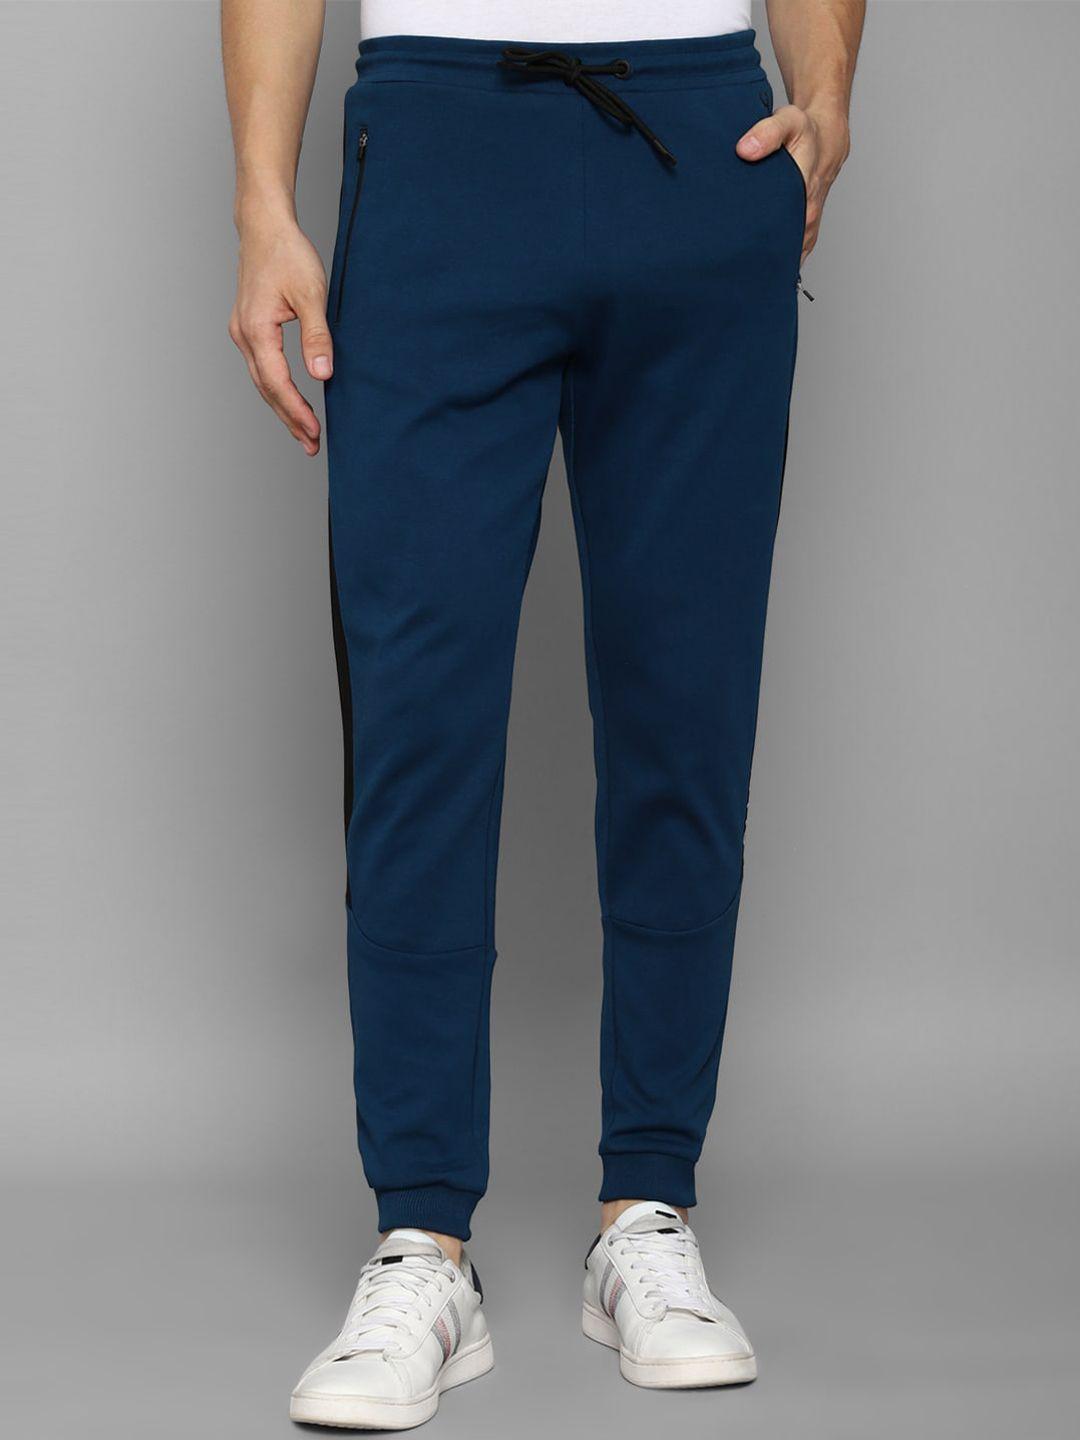 allen solly tribe men blue printed joggers